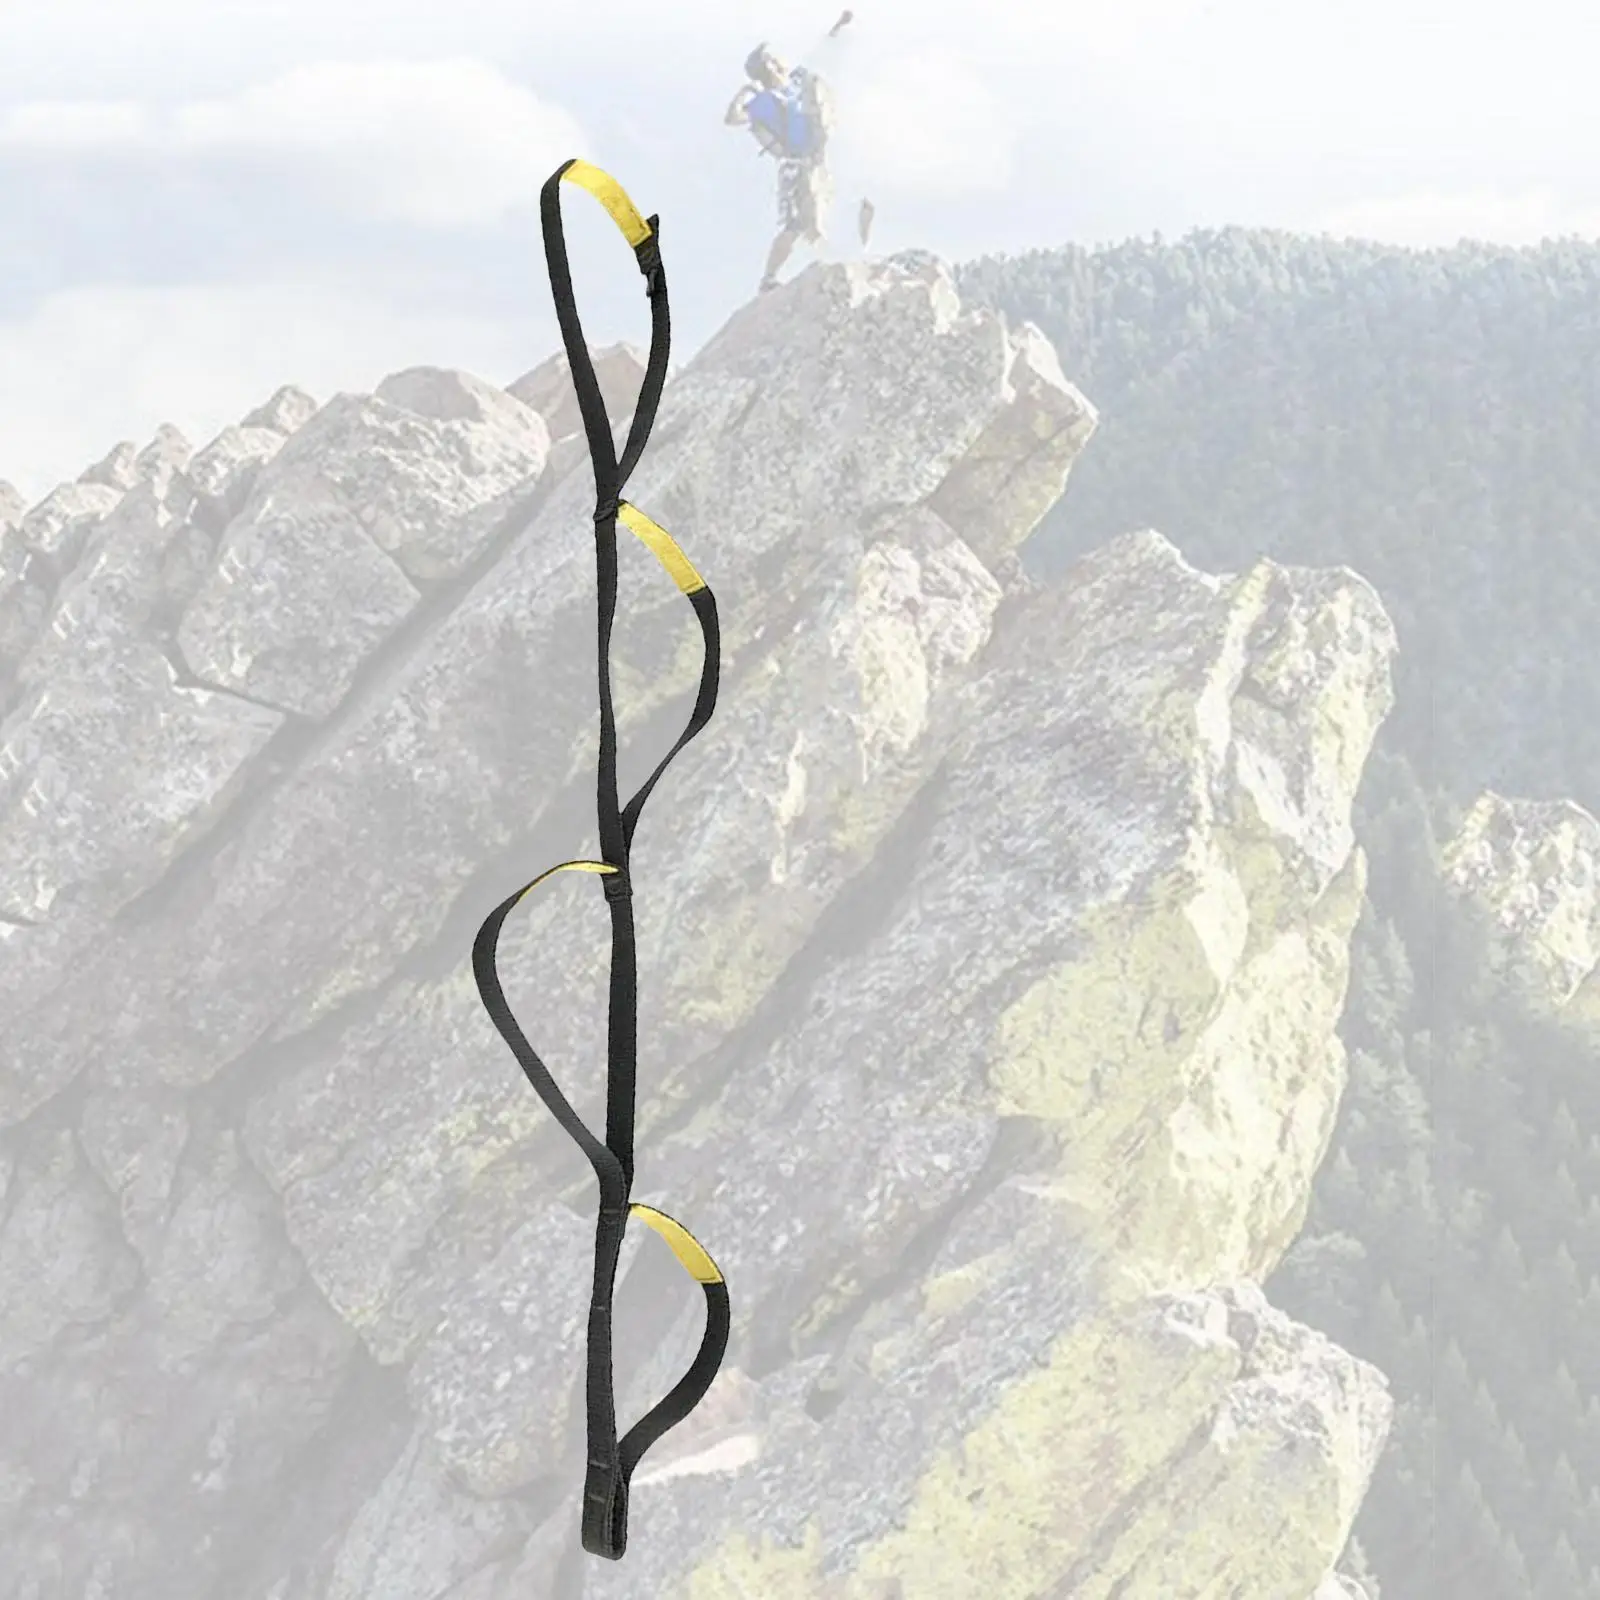 Webbing Strap Ladder Outdoor Climbing Rope Ladder Ascending Climbing Rope Aider for Mountaineering Caving Swim Emergency Camping